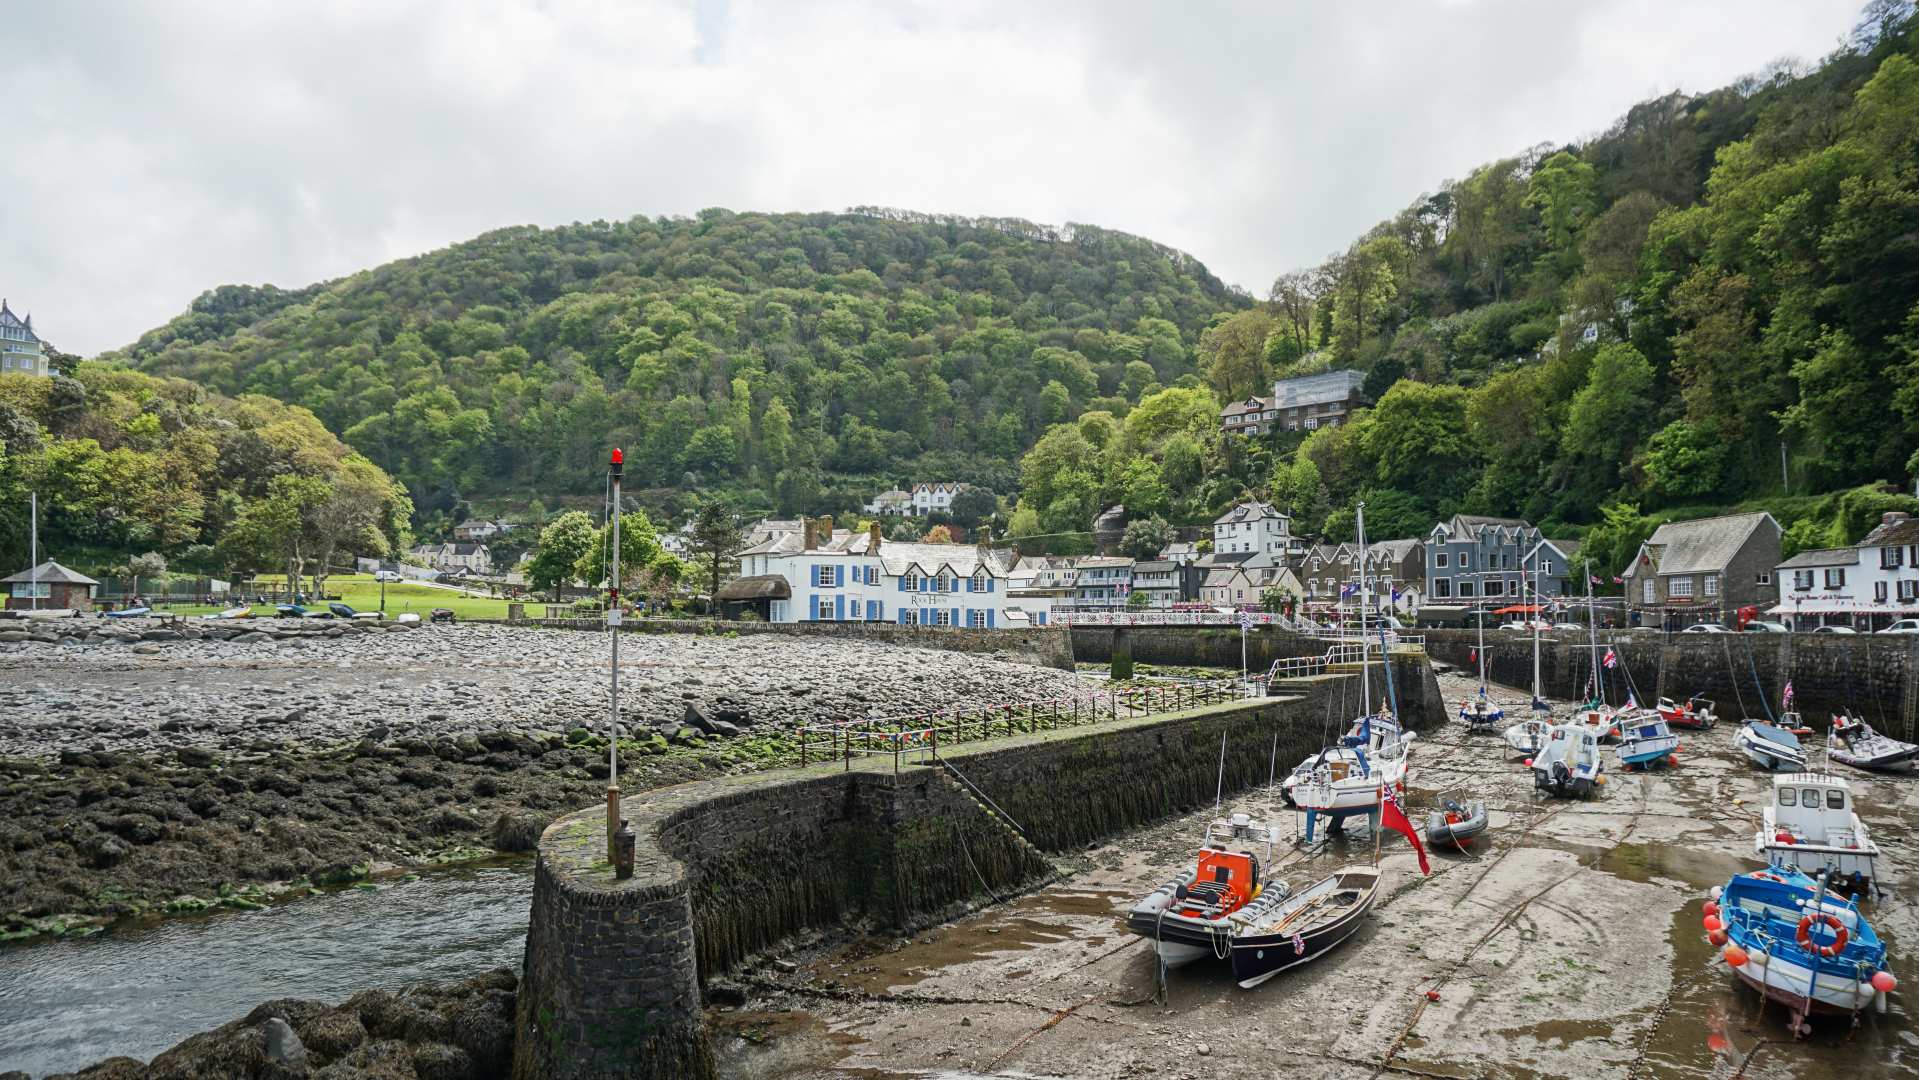 Lynmouth - Lynmouth